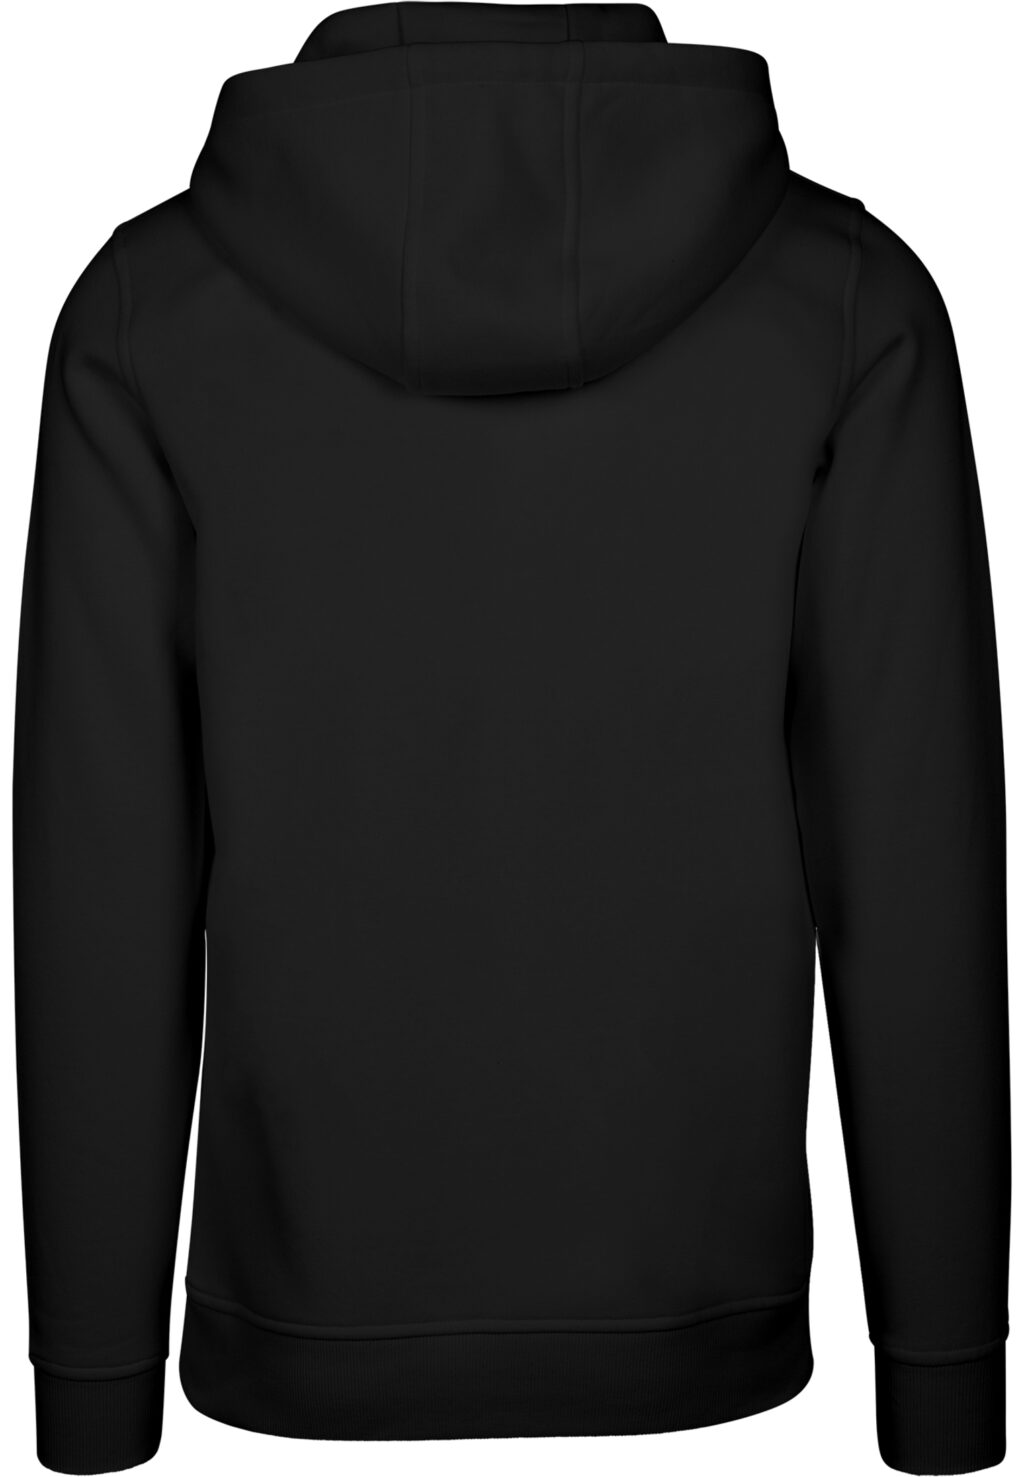 Out$ide Hoody black MT3044